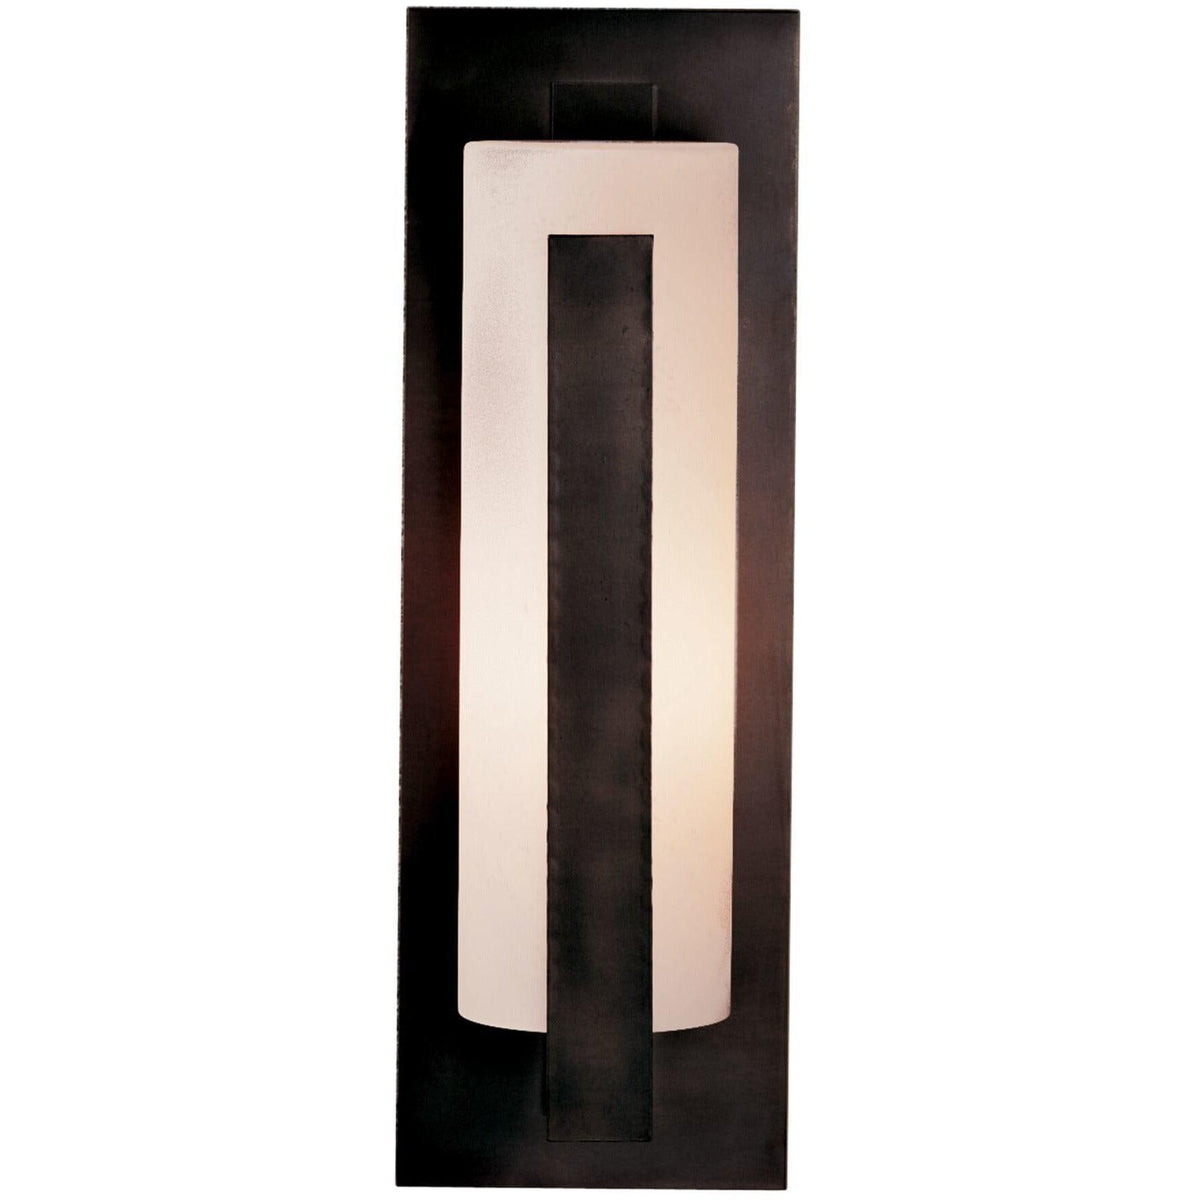 Hubbardton Forge - Forged 23-Inch Outdoor Wall Sconce - 307287-SKT-77-GG0037 | Montreal Lighting & Hardware